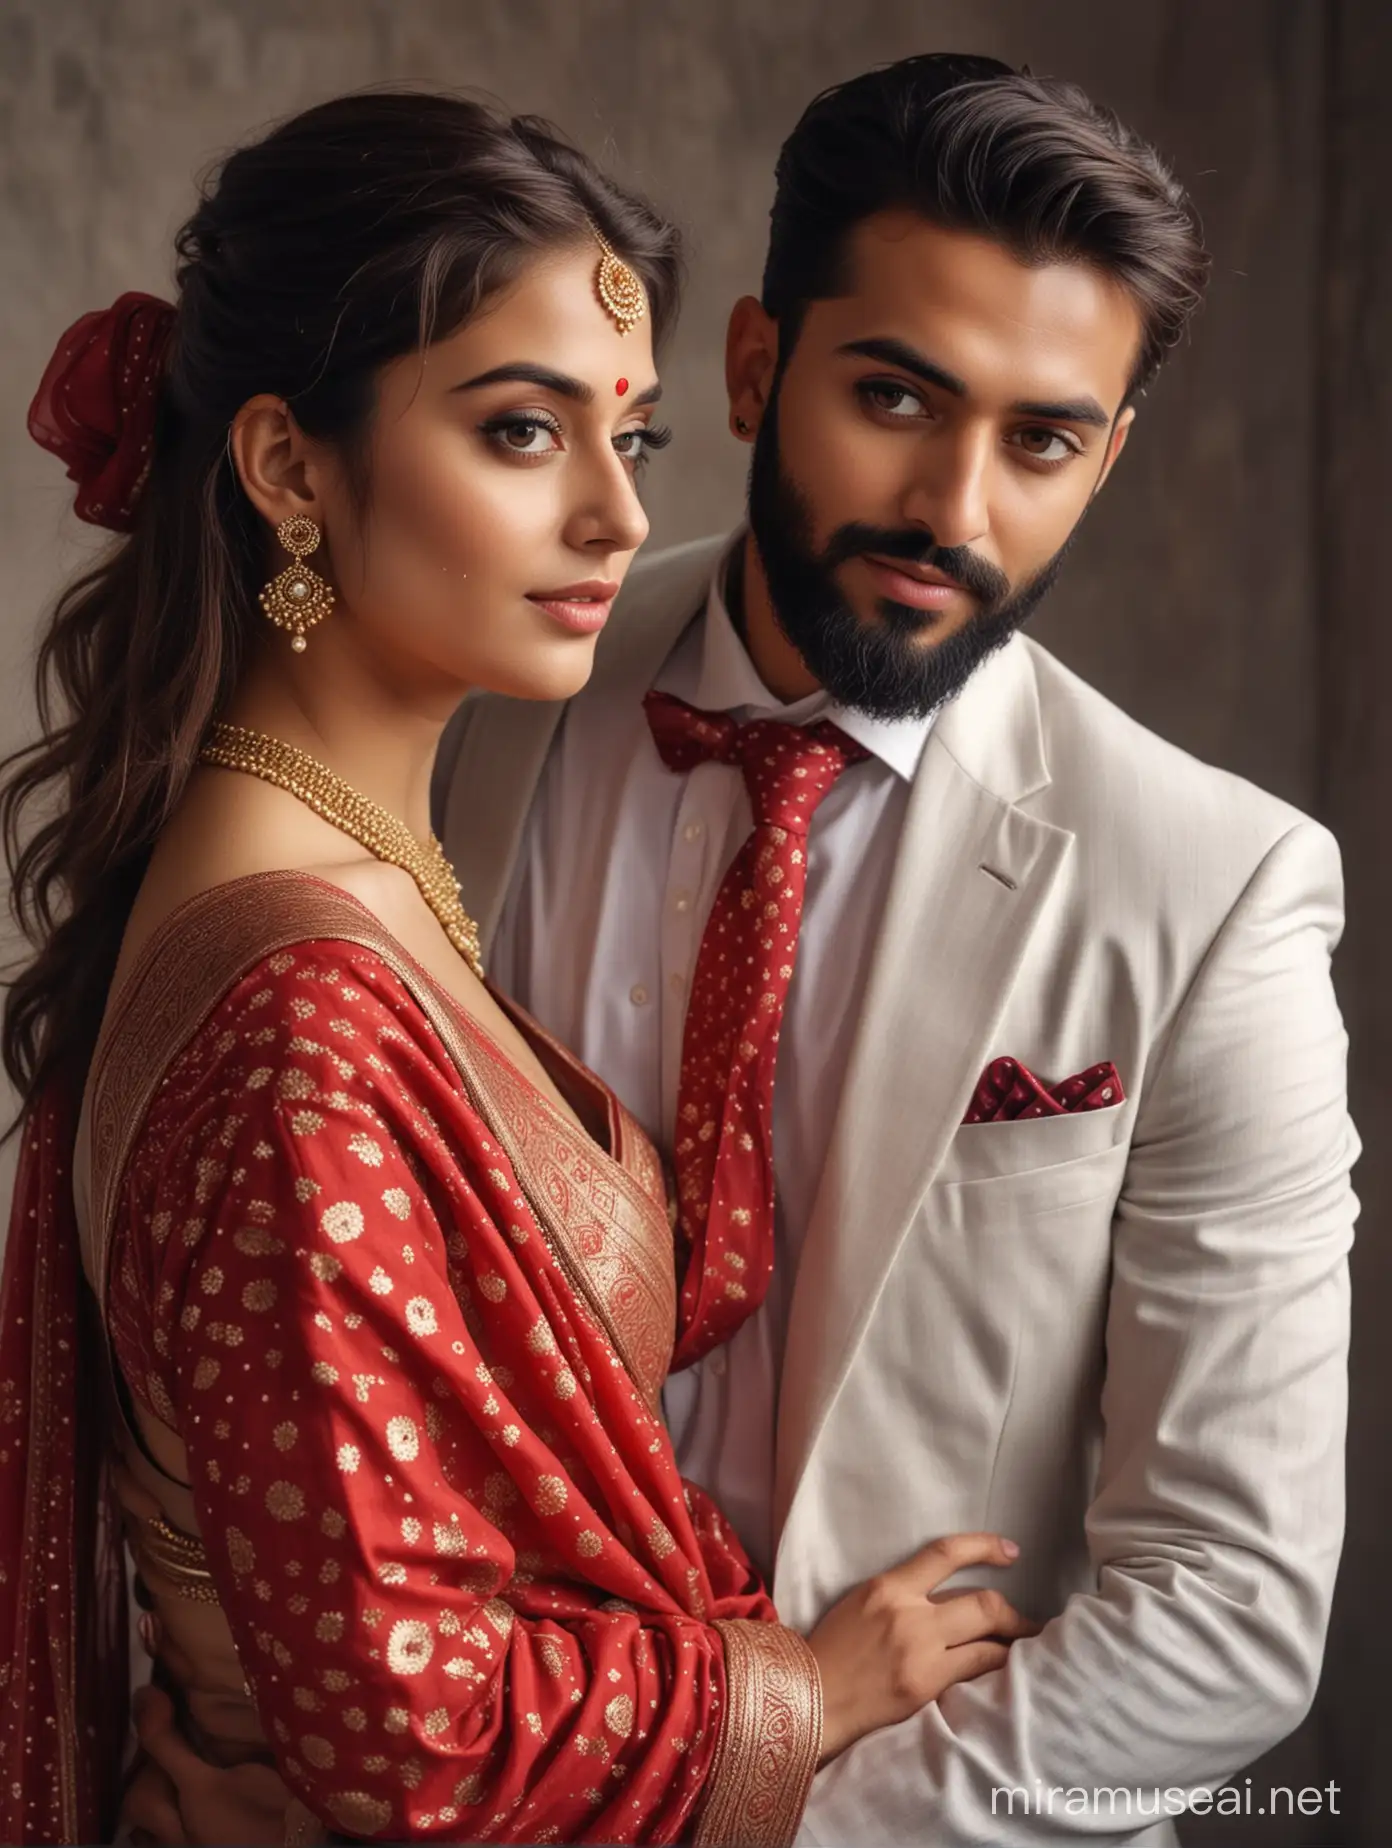 full portrait photo of most beautiful european couple as most beautiful indian couple, most beautiful girl in saree, low cut back, red dot,  full makeup, embracing man from back side, girl holding man from back, girl holding man from back with emotional attachment and ecstasy, man with stylish beard and in formals and tie, photo realistic, 4k.